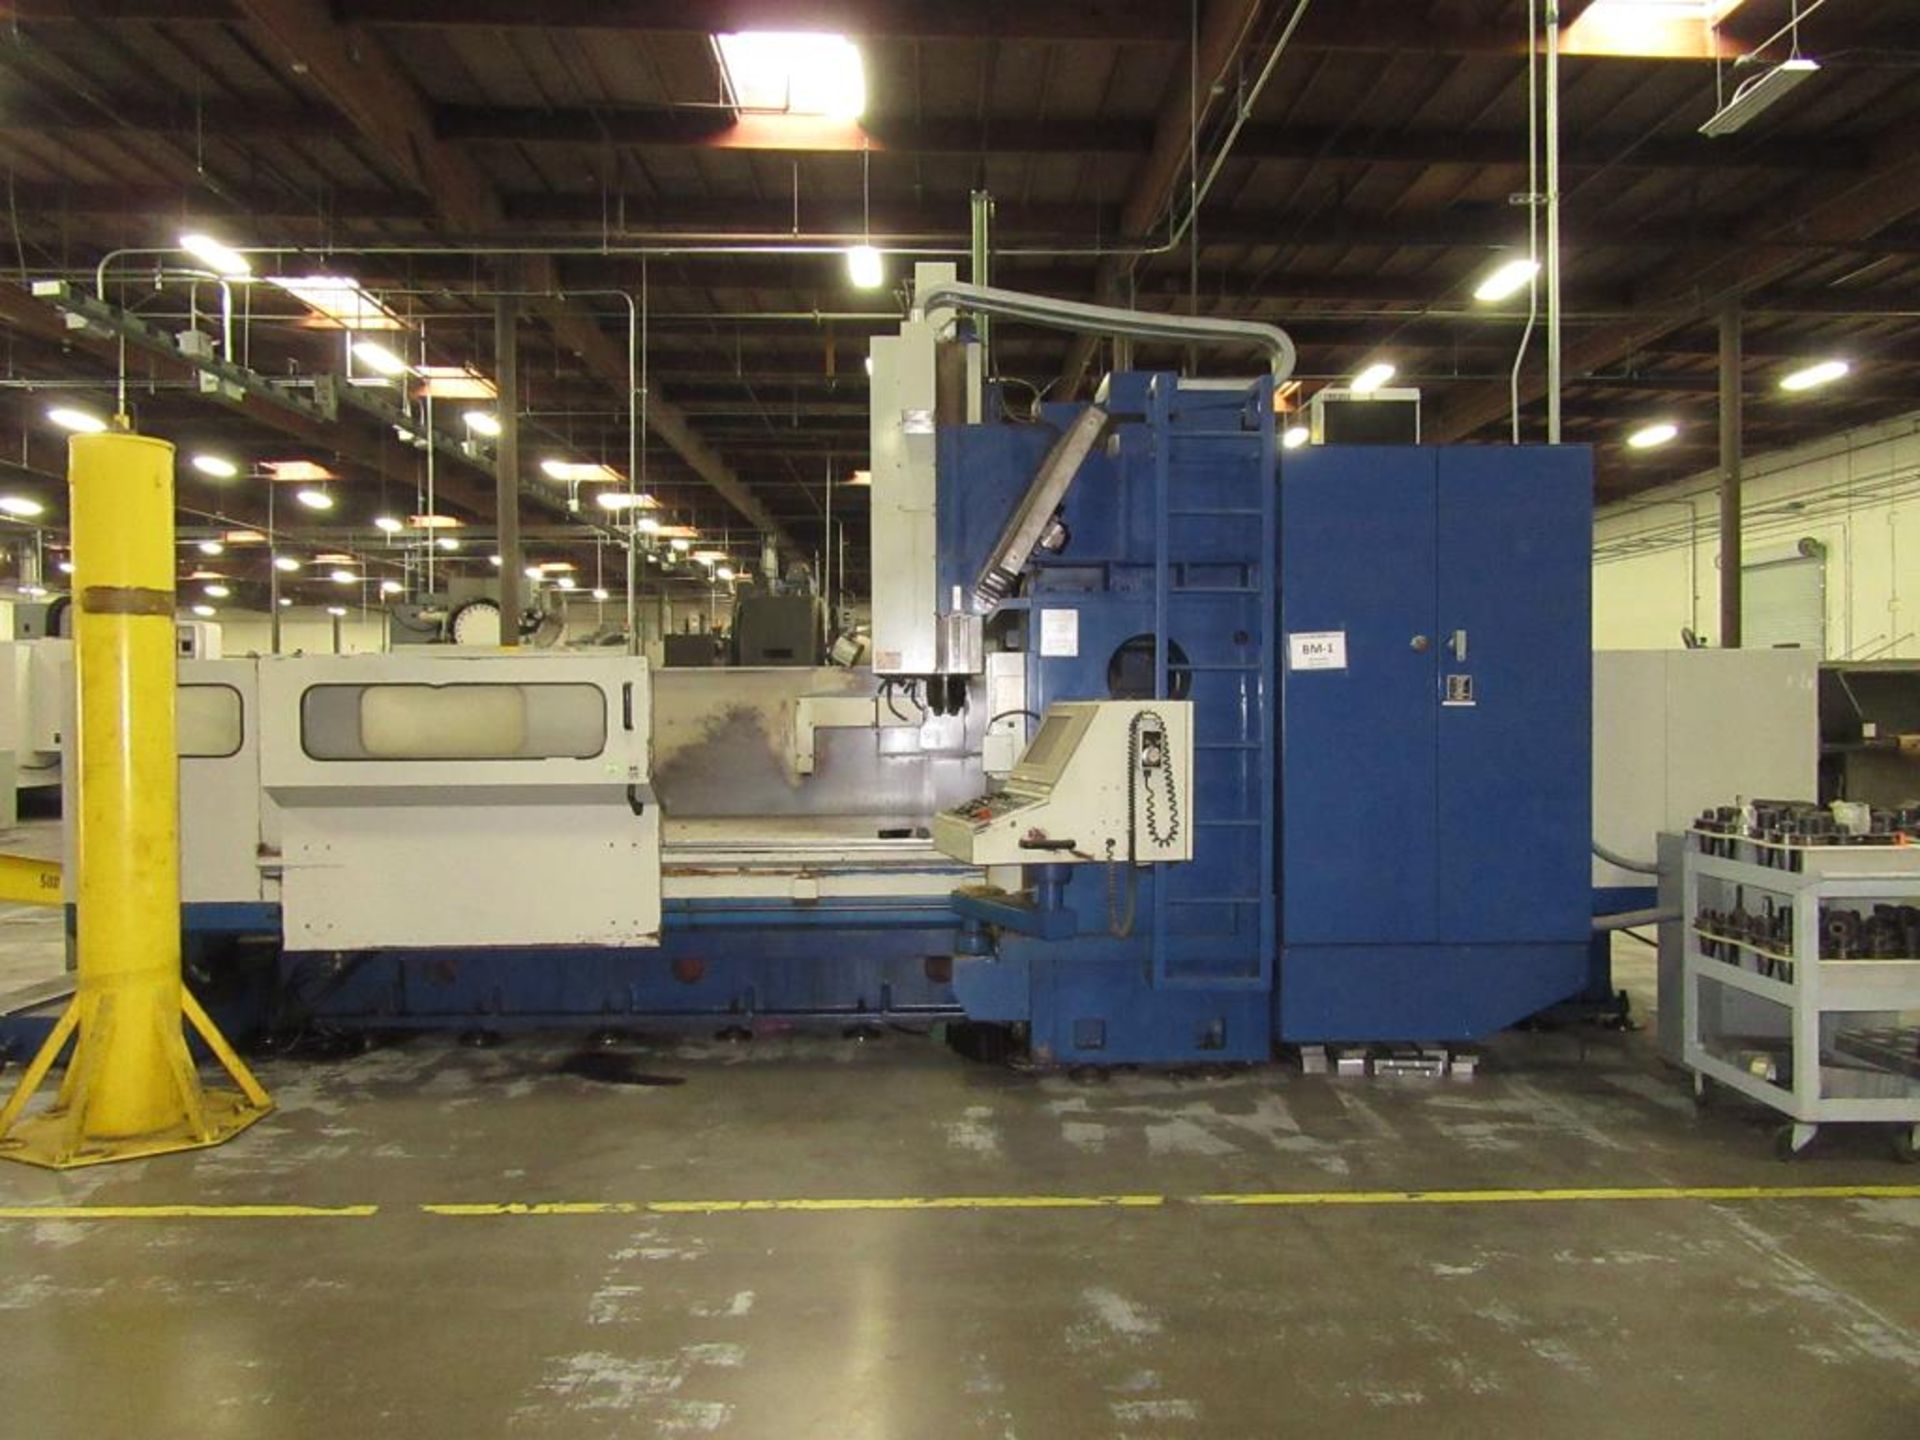 Viper HB-130W. 1997 - CNC Vertical Bridge Mill with Mitsubishi 3-Axis Control Panel, Table Size